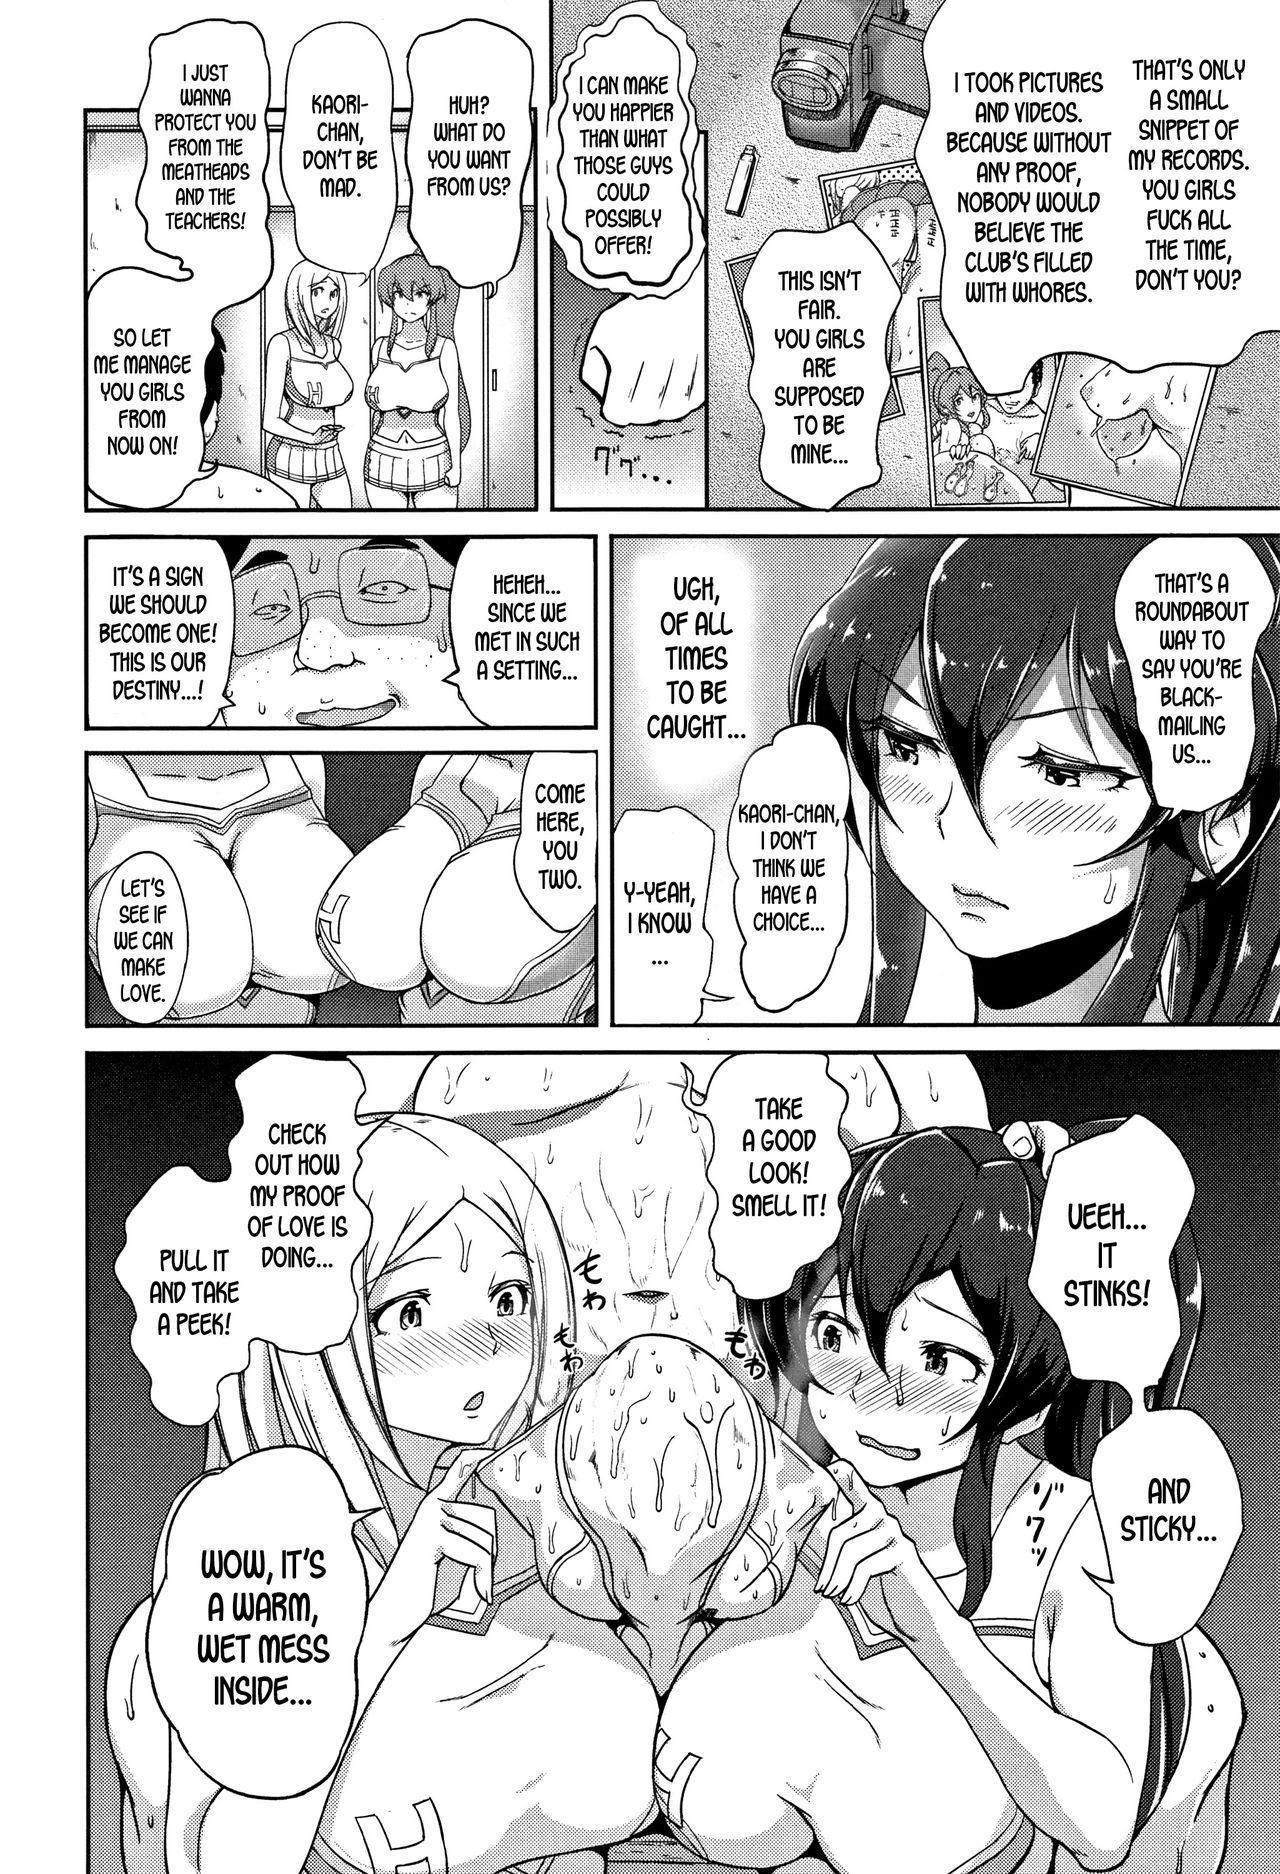 Huge Dick Inshuu Cheer Girl | Lewd Scent Cheer Girls Onlyfans - Page 8